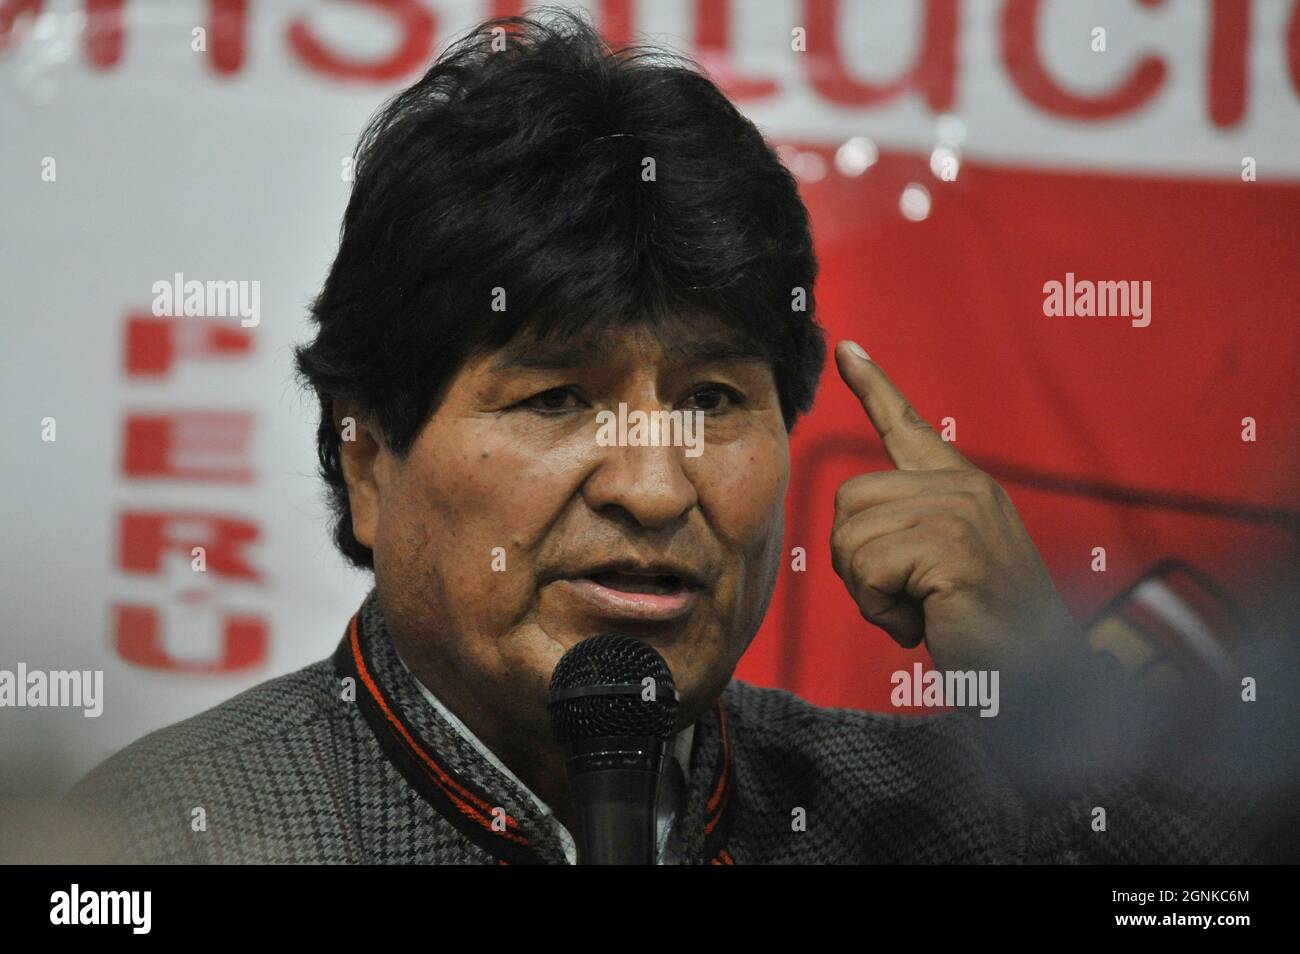 Saturday, September 25, 2021: The former president of Bolivia, Evo Morales, arrived in Arequipa (Peru) to promote the change of the Constitution Stock Photo